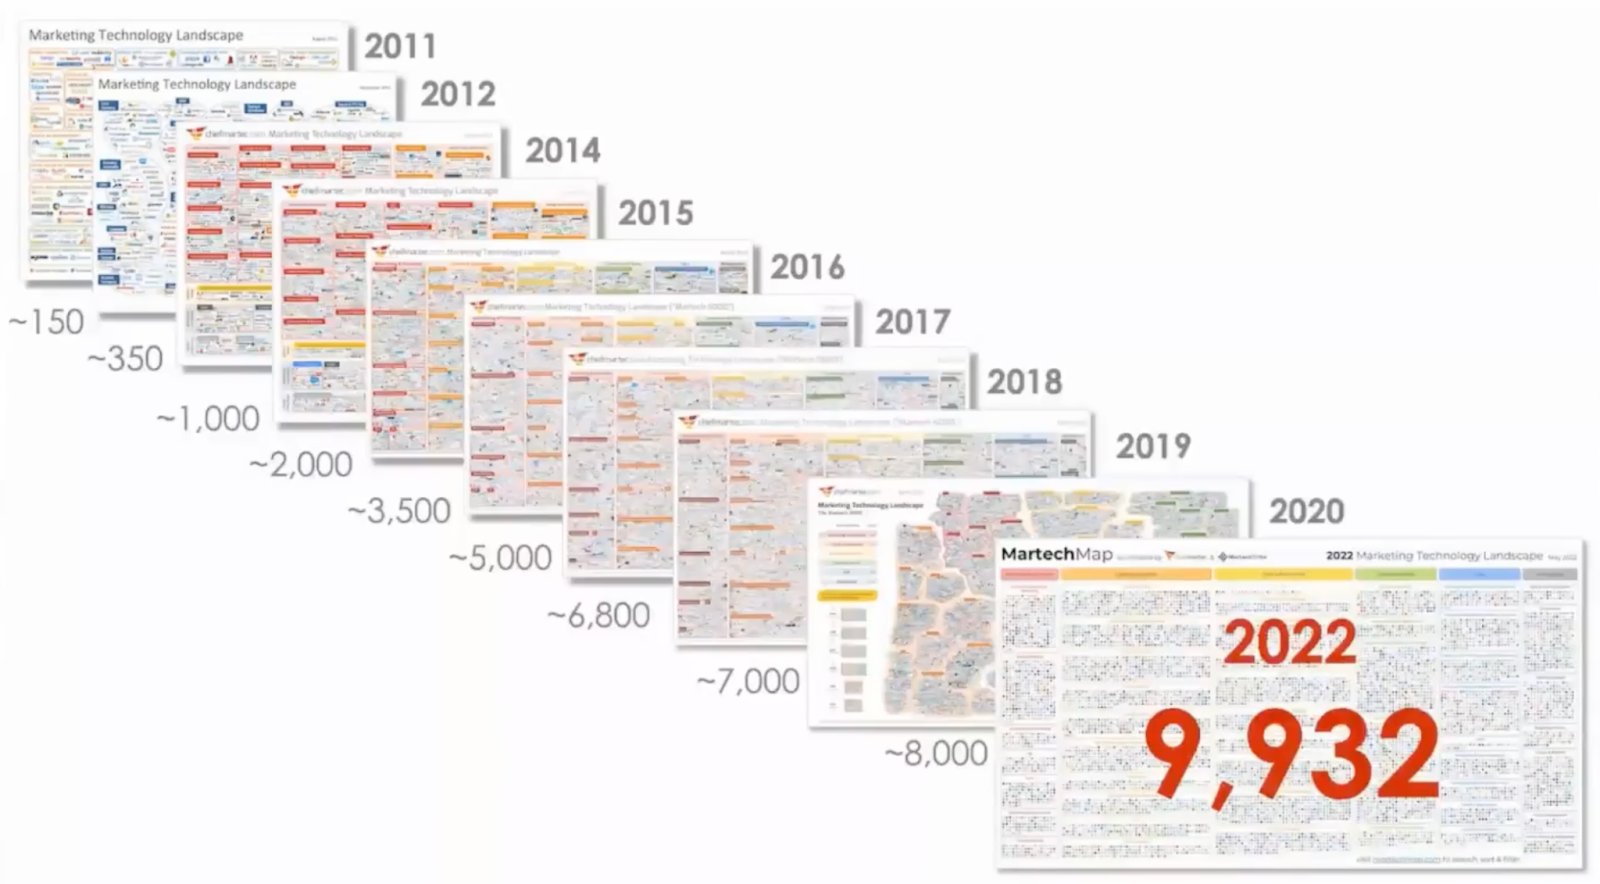 Martech through the years